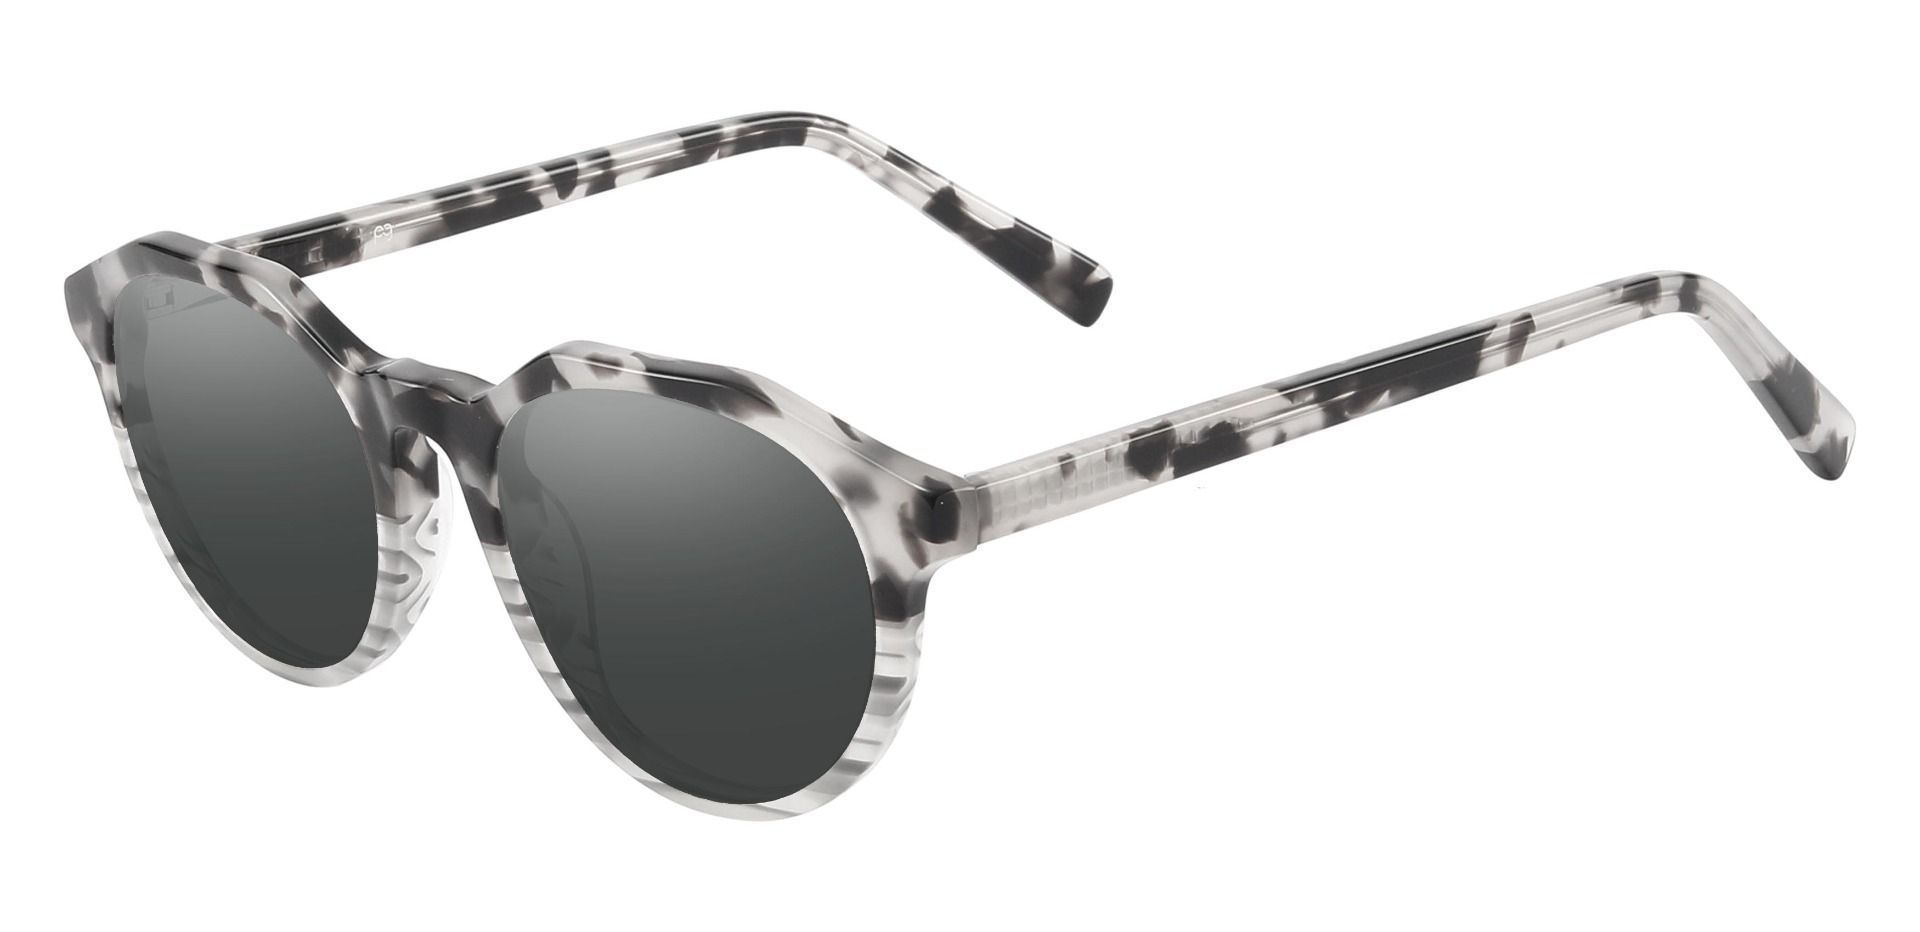 Mayfield Oval Non-Rx Sunglasses - Black Frame With Gray Lenses